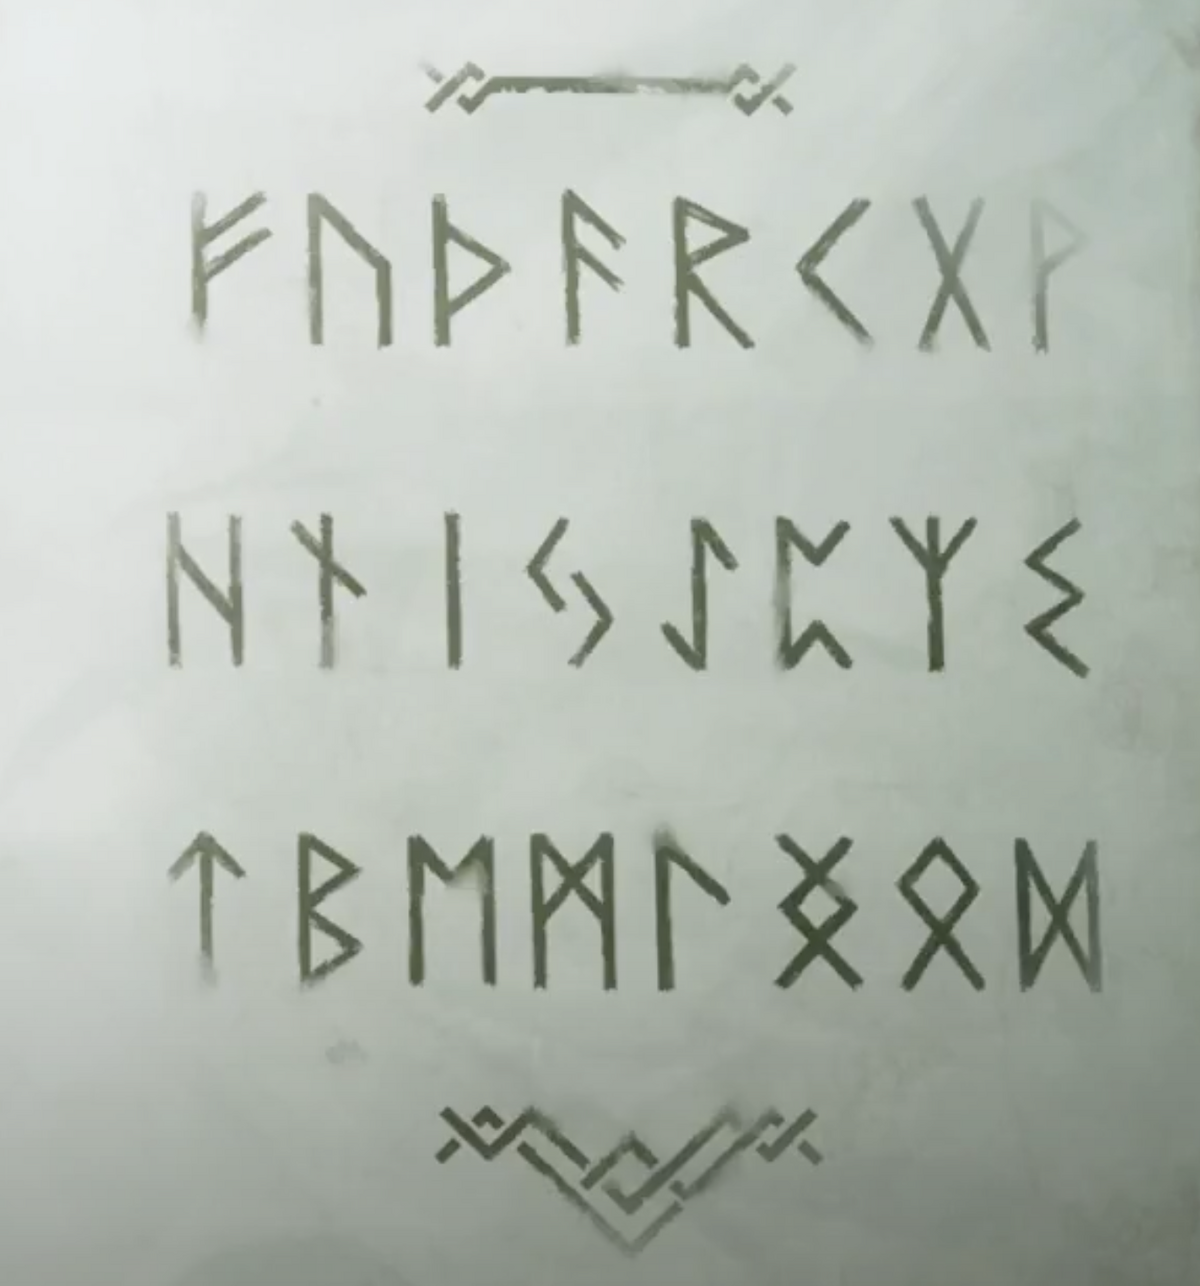 Cracking the Norse code - how fans are deciphering God of War's runes